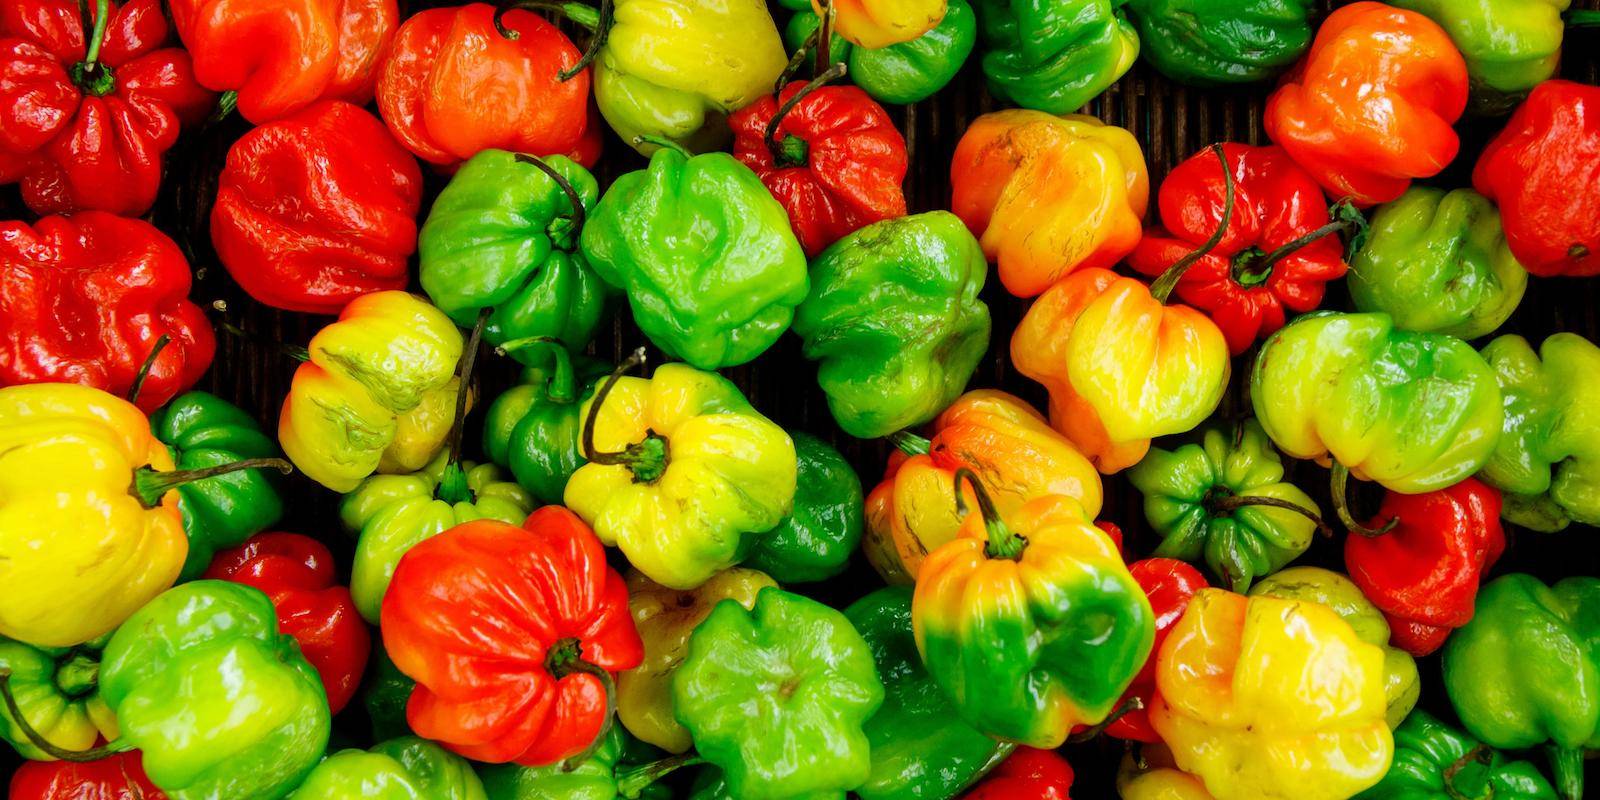 A picture of red, green and yellow bell peppers.